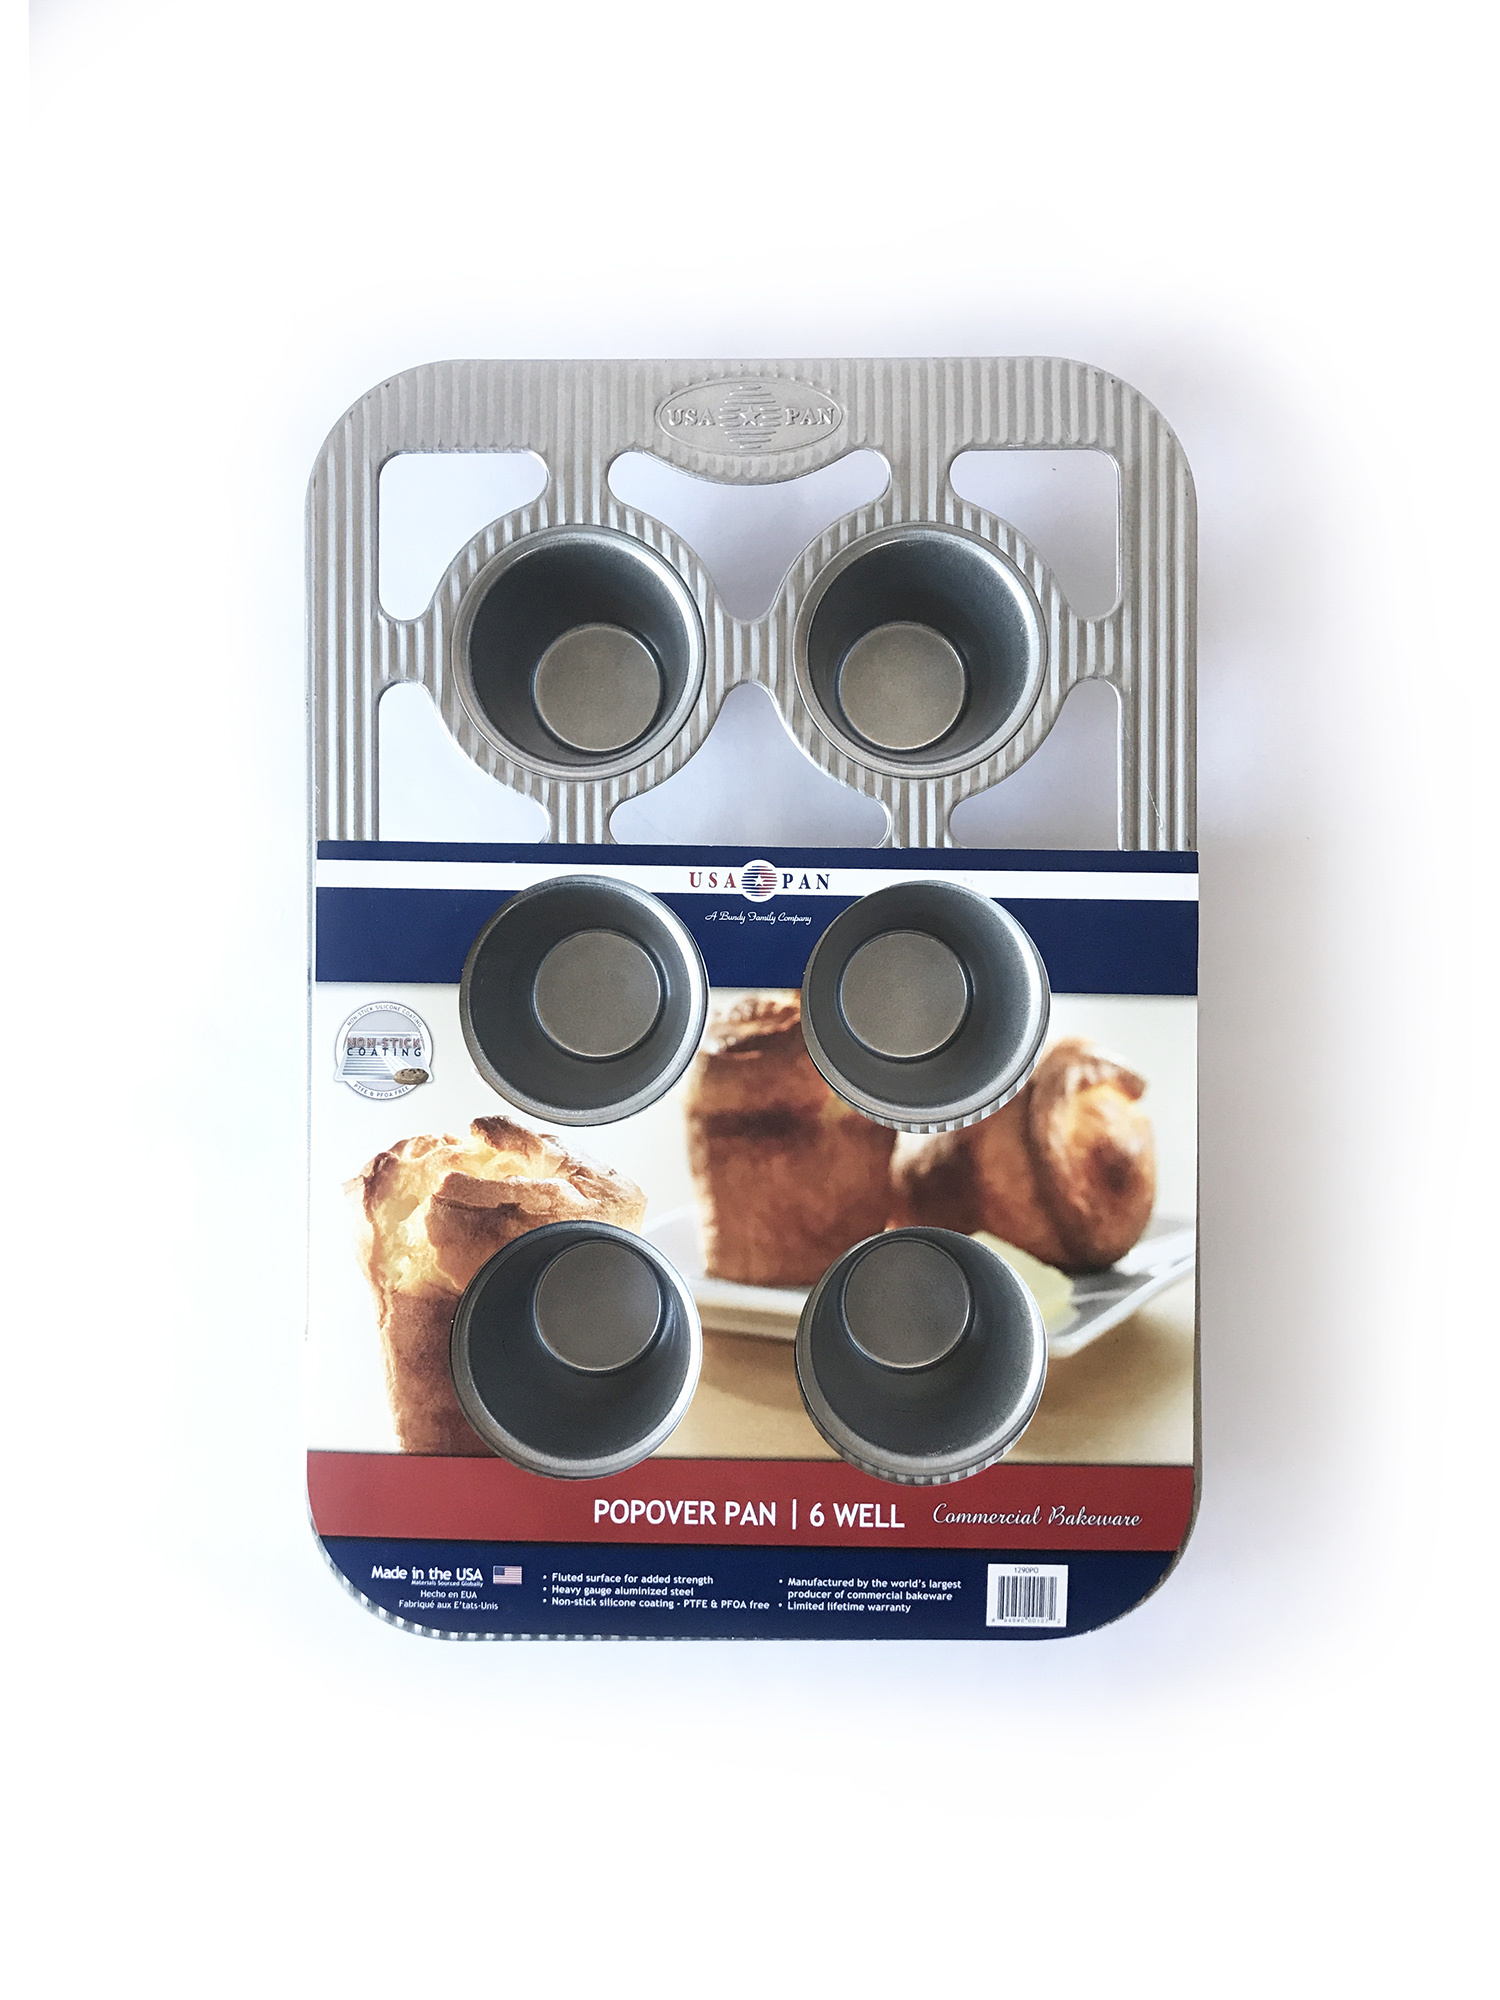 USA Pans Popover Pan 6 Well - Stock Culinary Goods